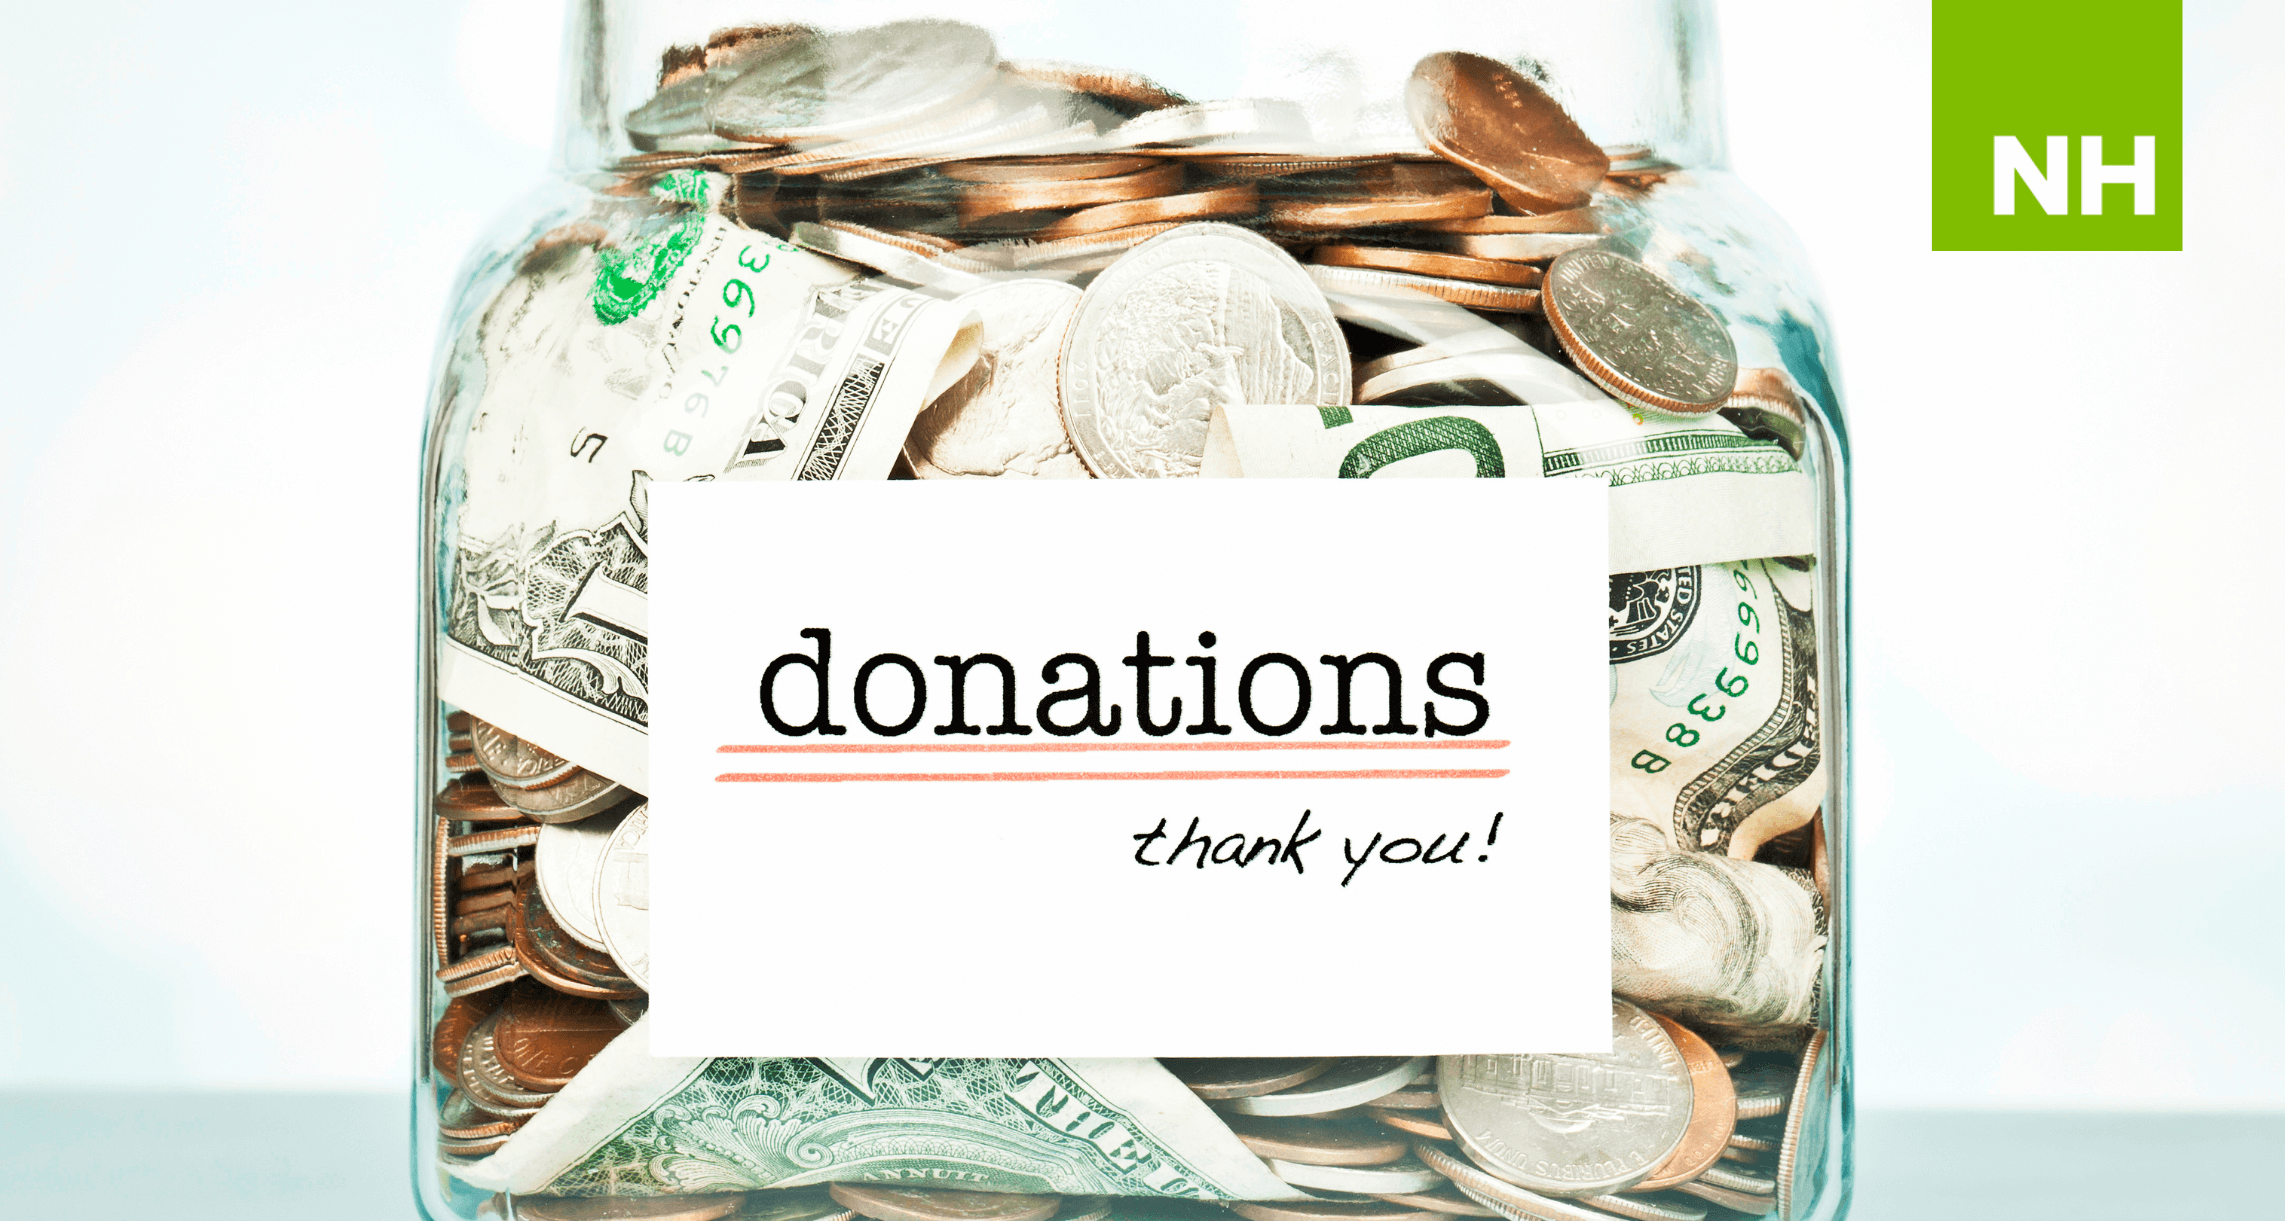 27 Donation Page Best Practices For Nonprofits